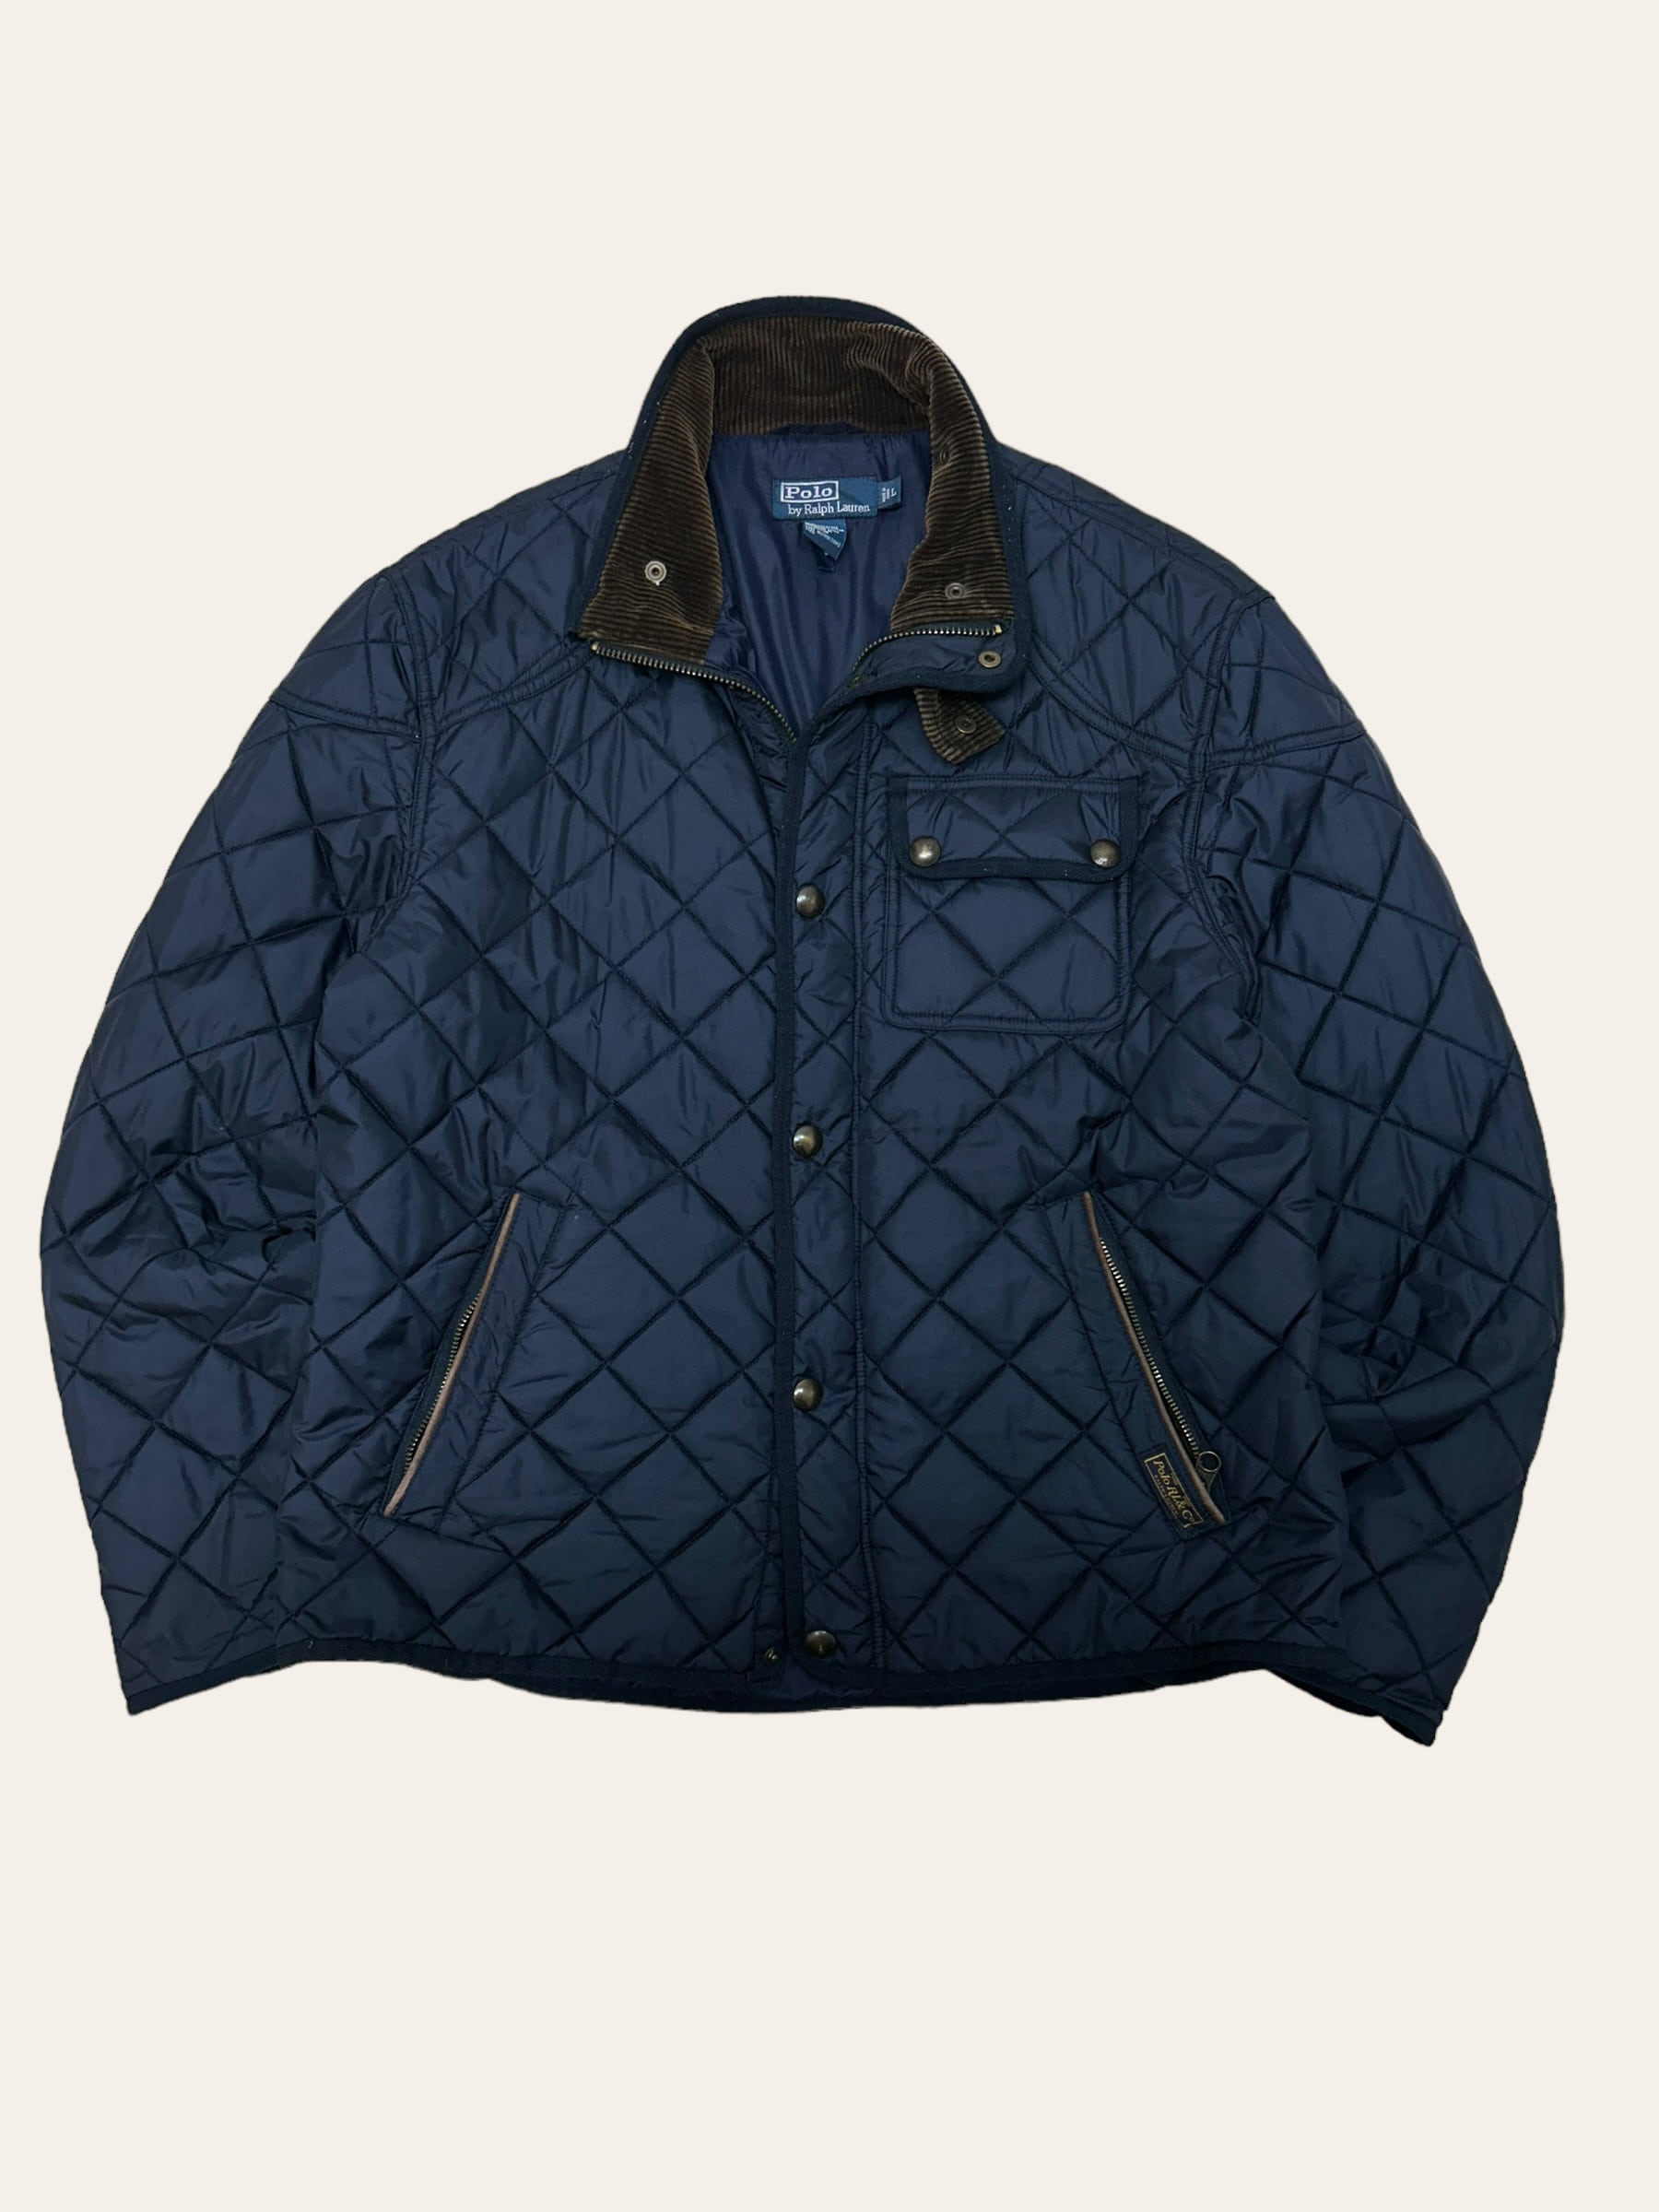 Polo ralph lauren navy quilted jacket L